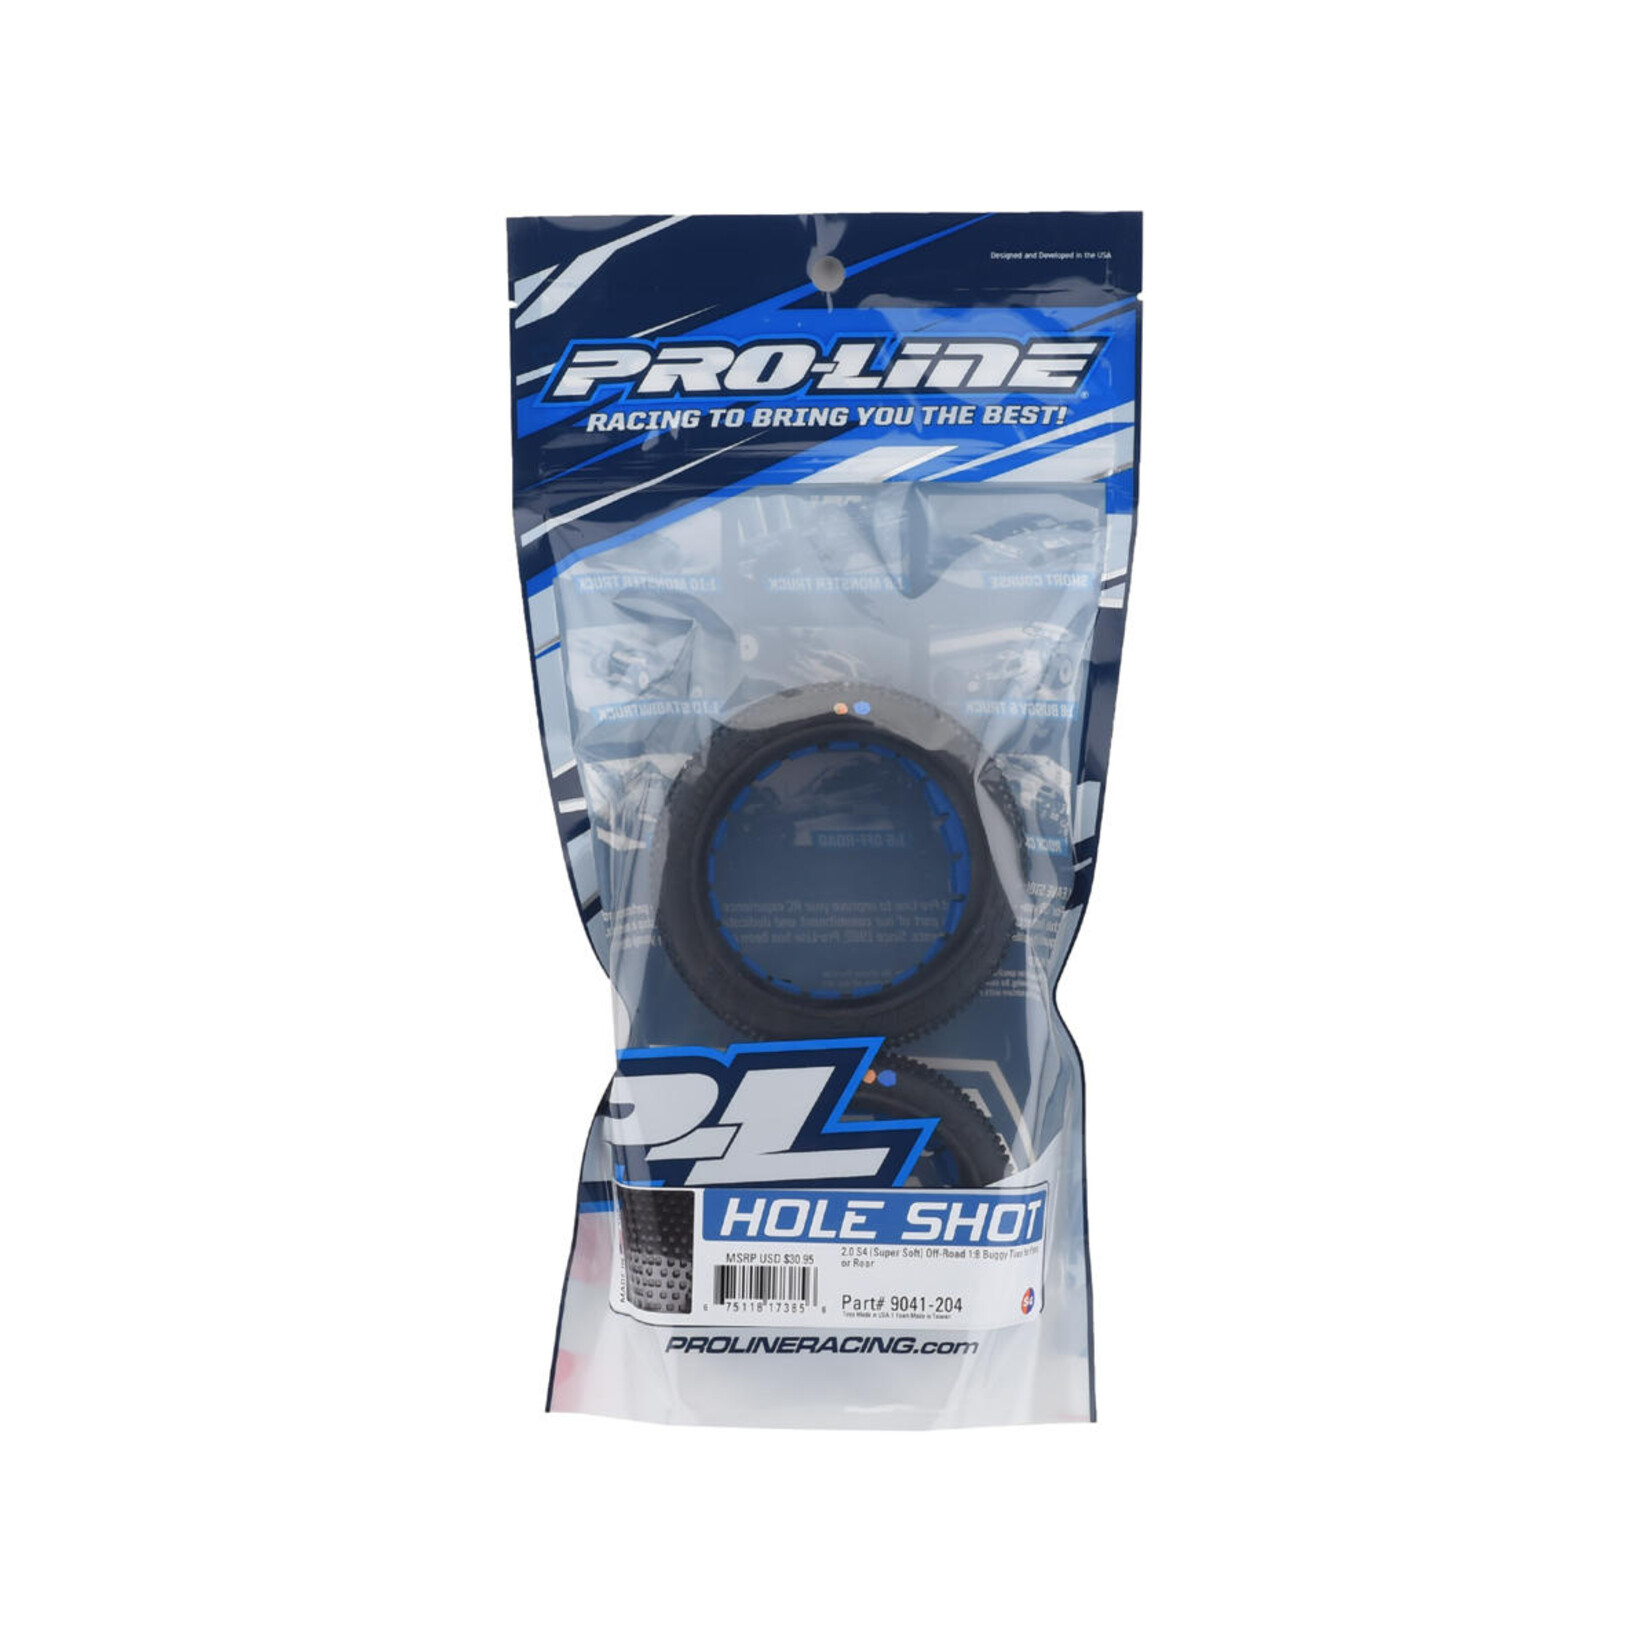 Pro-Line Pro-Line Hole Shot 2.0 1/8 Buggy Tires w/Closed Cell Inserts (2) (S4) #9041-204